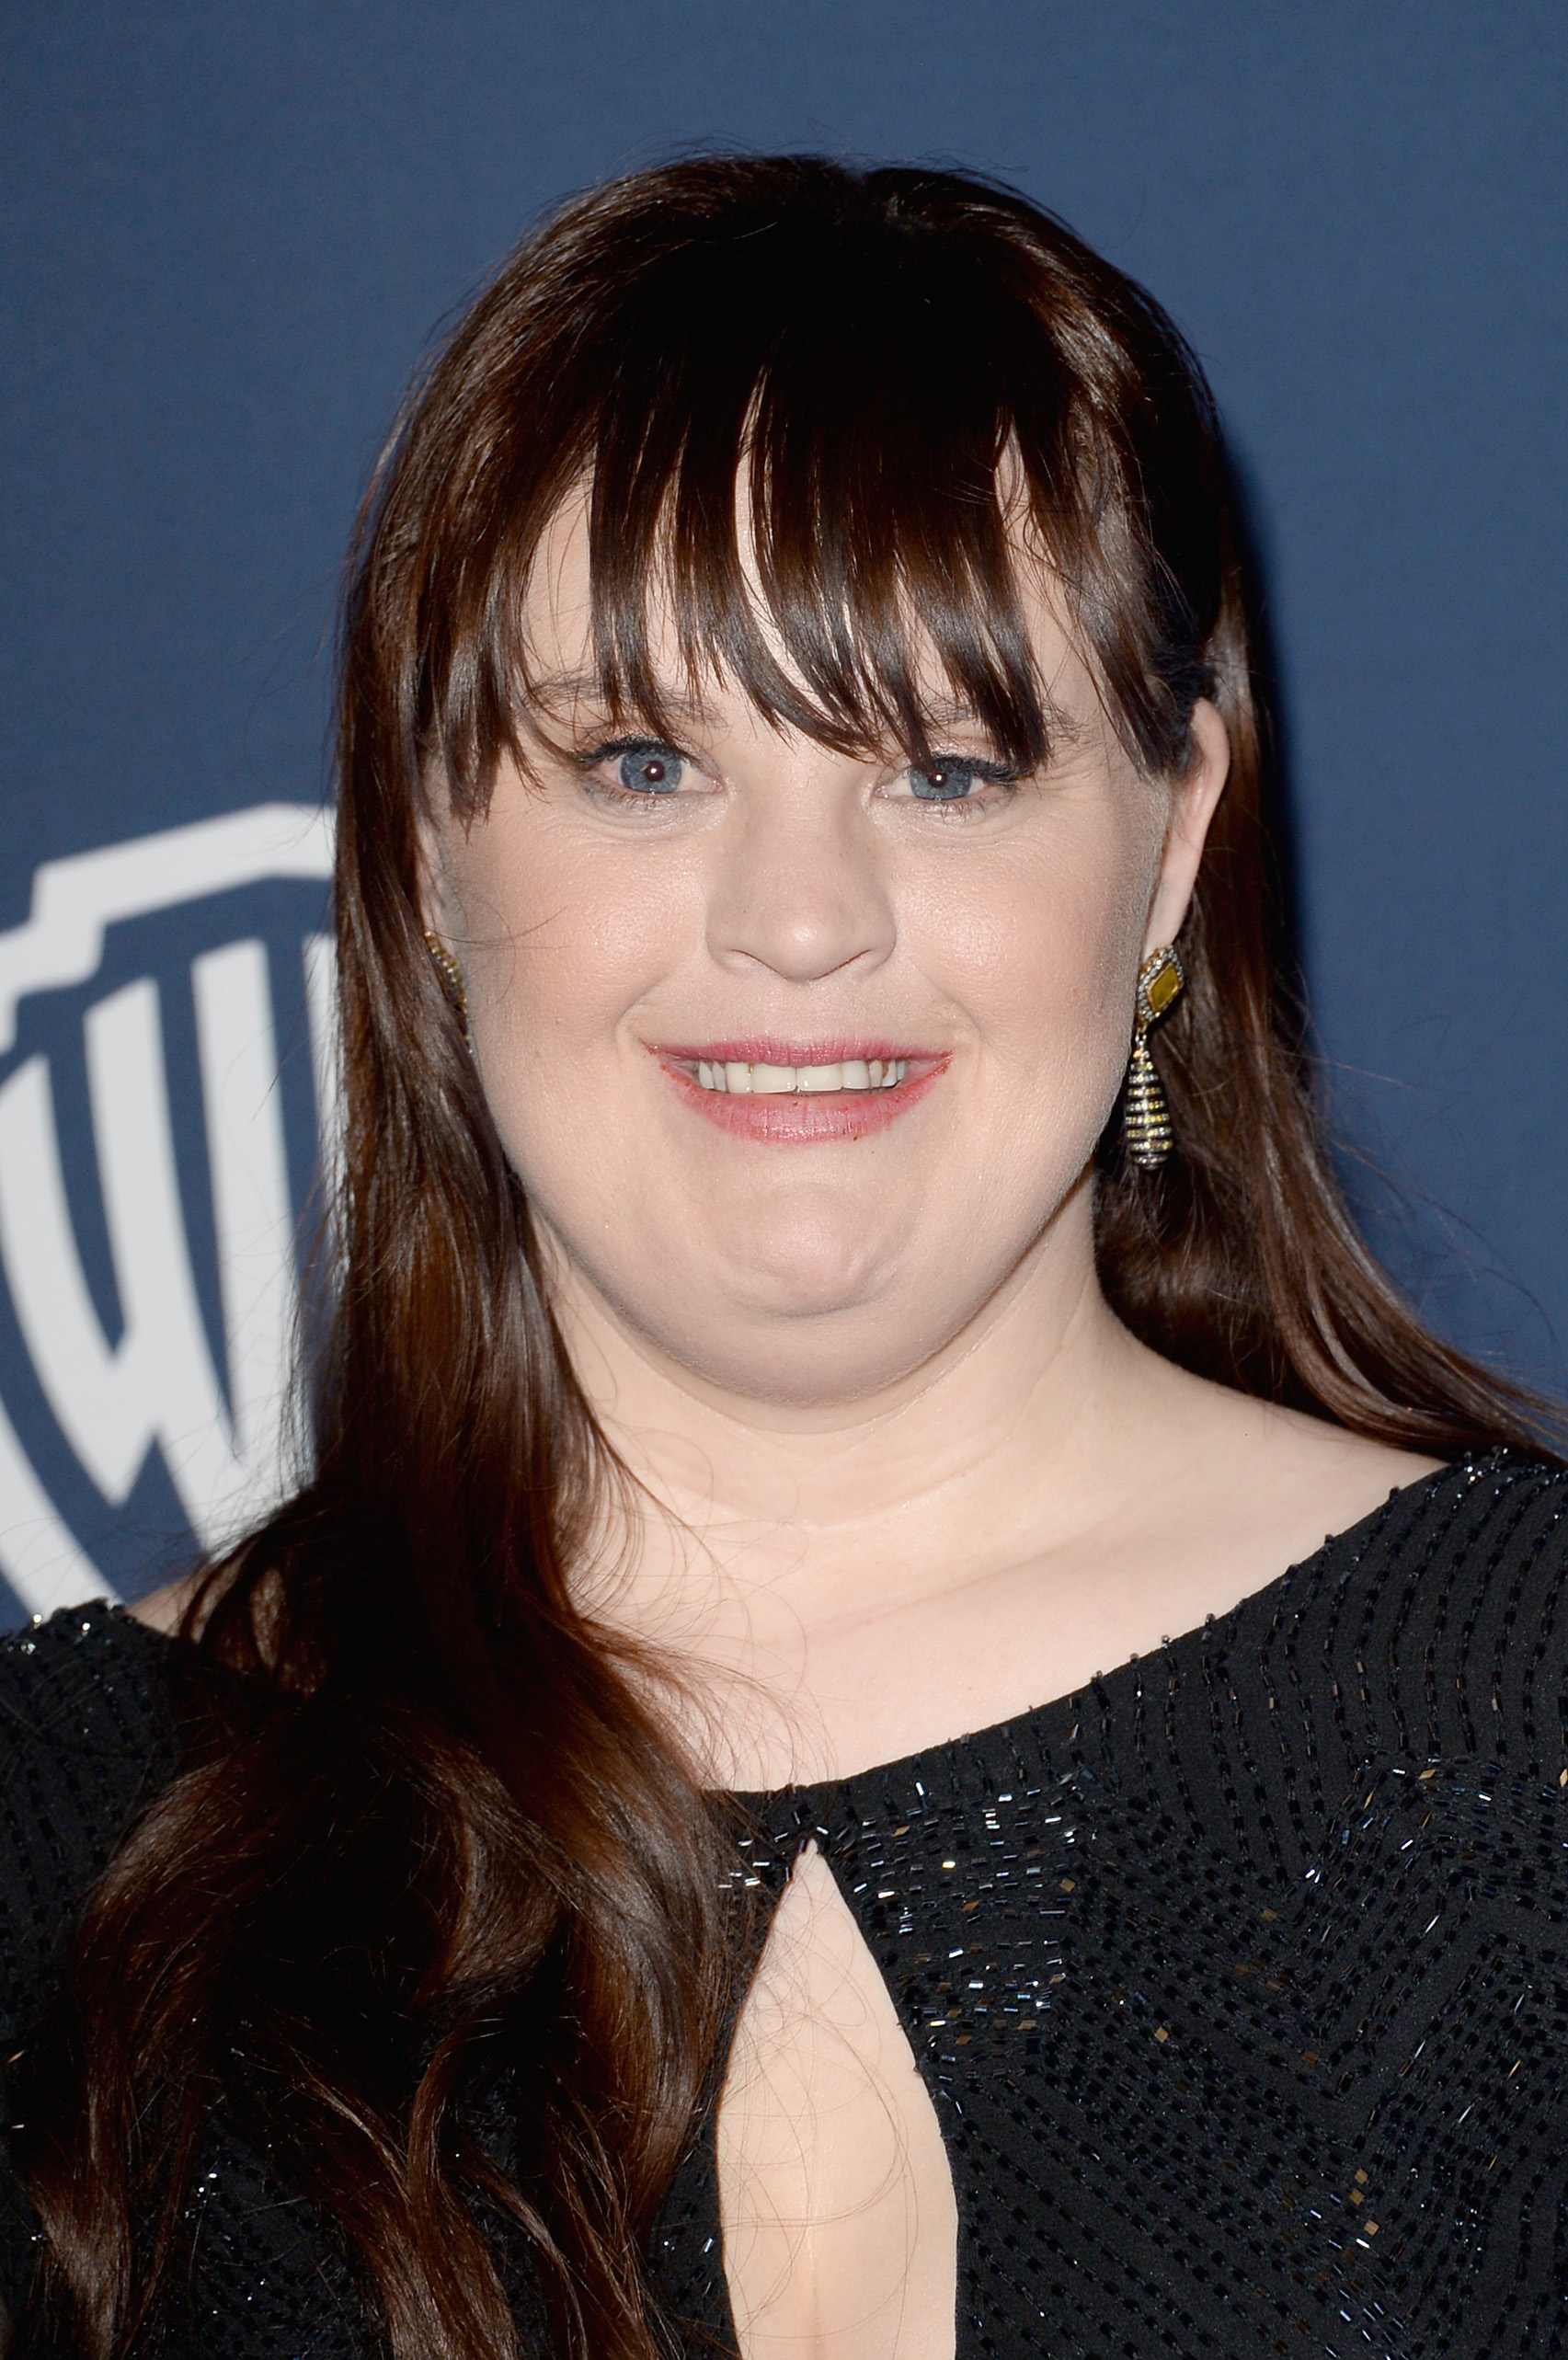 BEVERLY HILLS, CA - JANUARY 12: Actress Jamie Brewer attends the 2014 InStyle and Warner Bros. 71st Annual Golden Globe Awards Post-Party on January 12, 2014 in Beverly Hills, CA